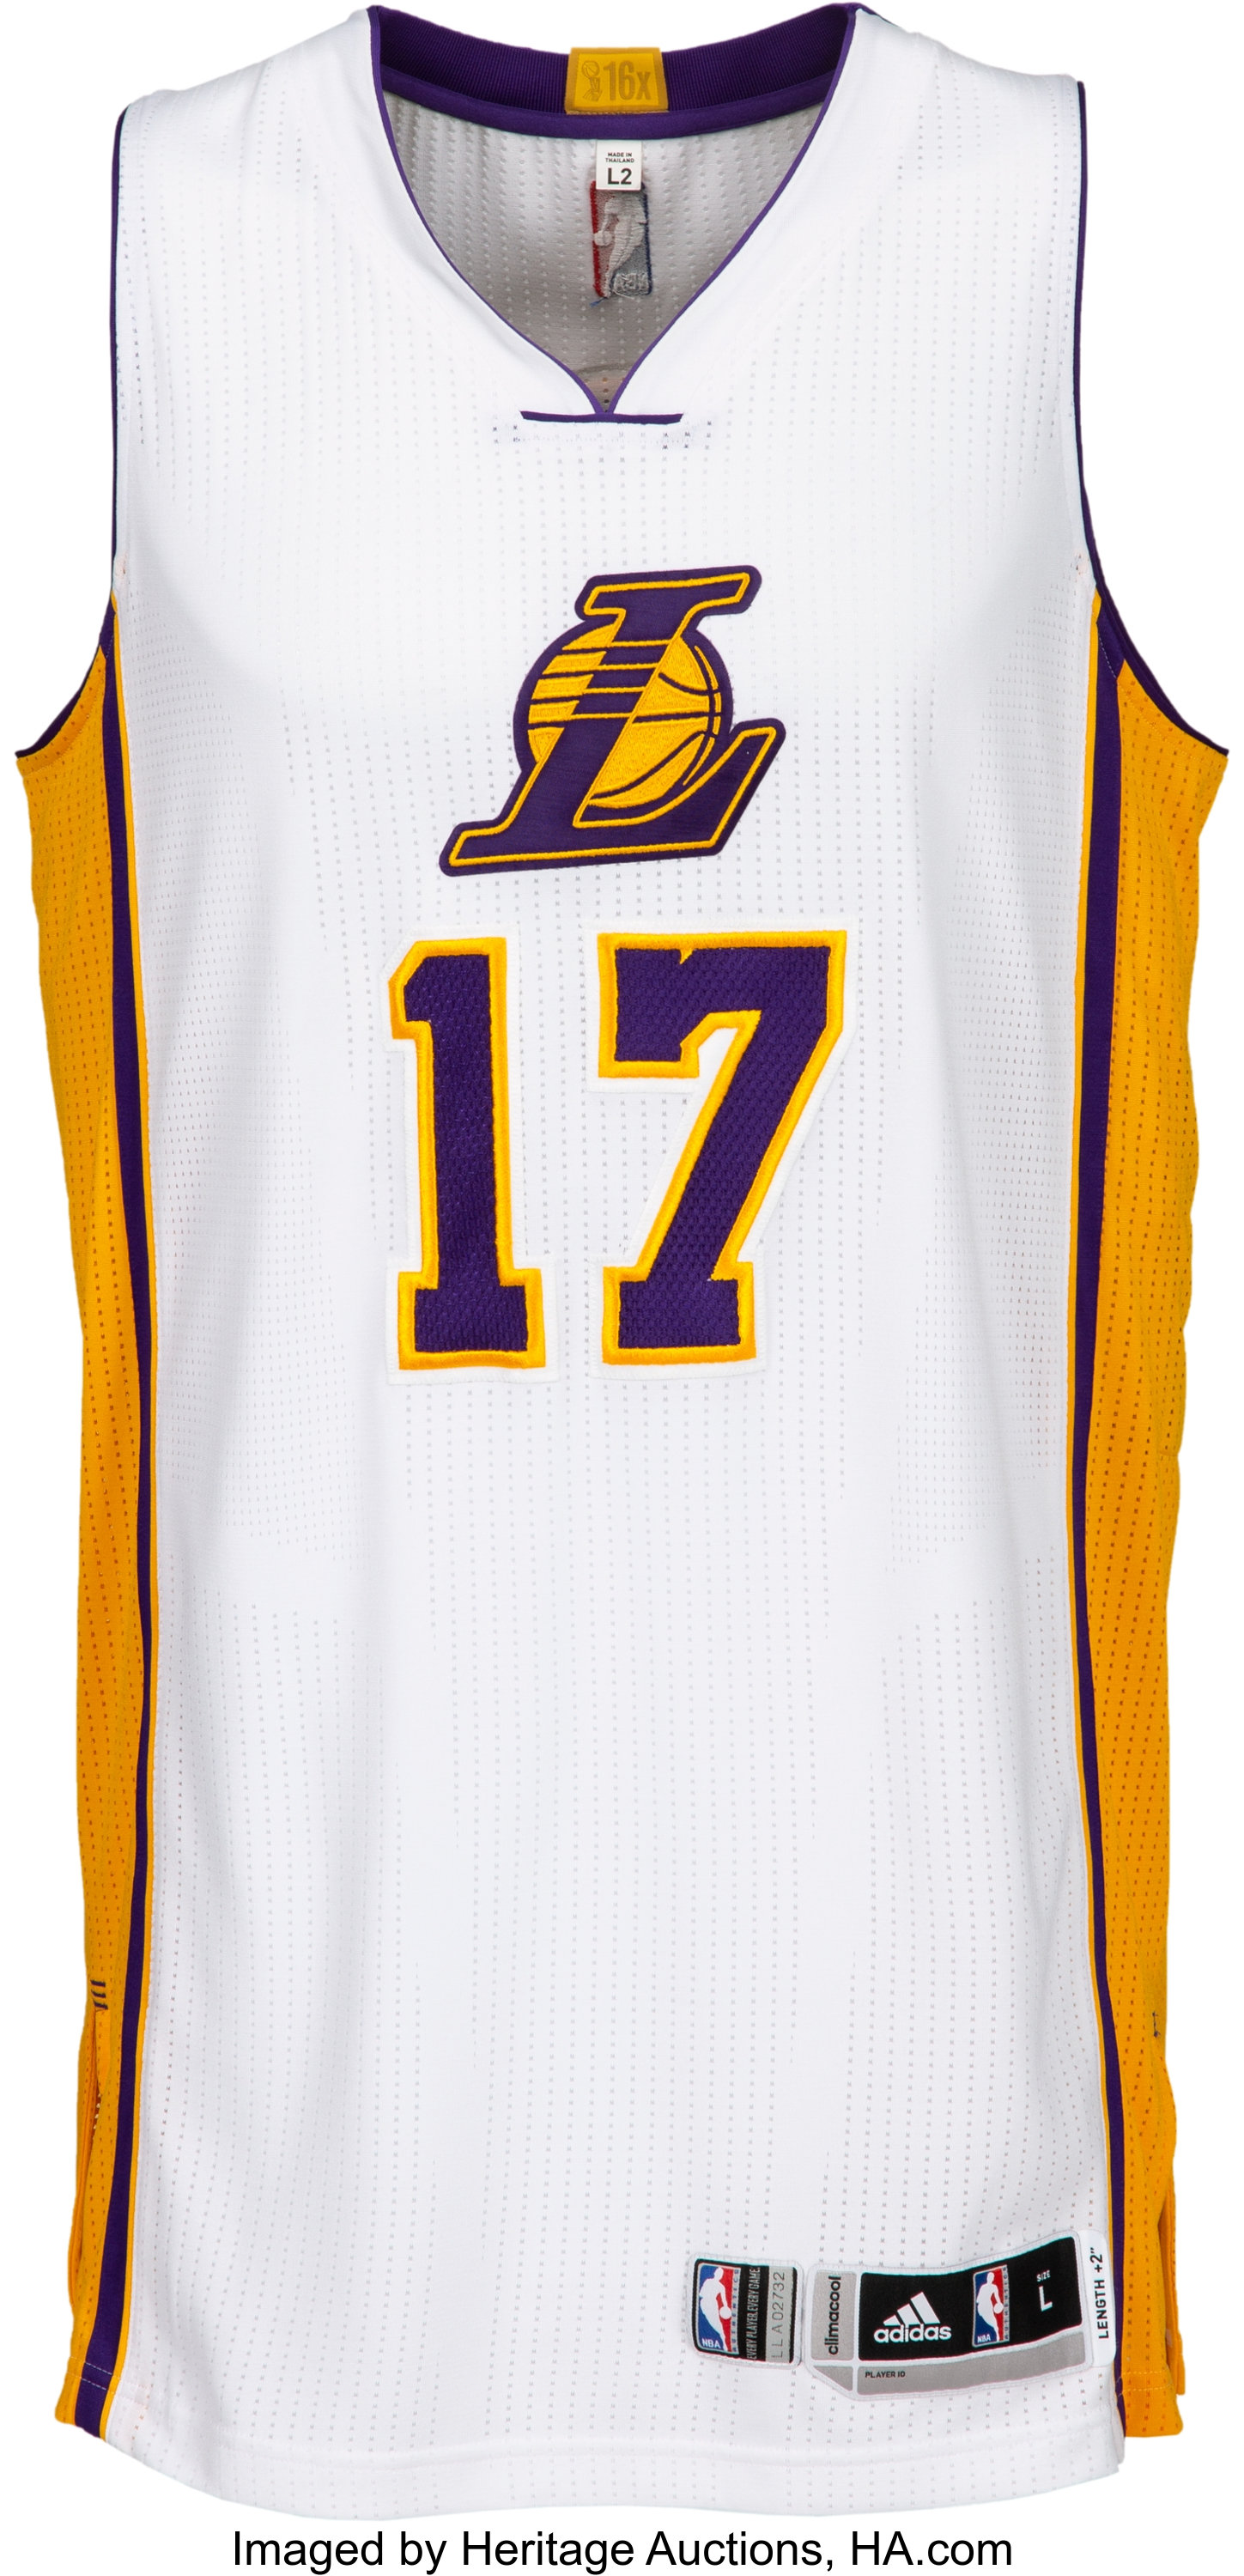 Jeremy Lin Lakers Jersey for Sale in Long Beach, CA - OfferUp